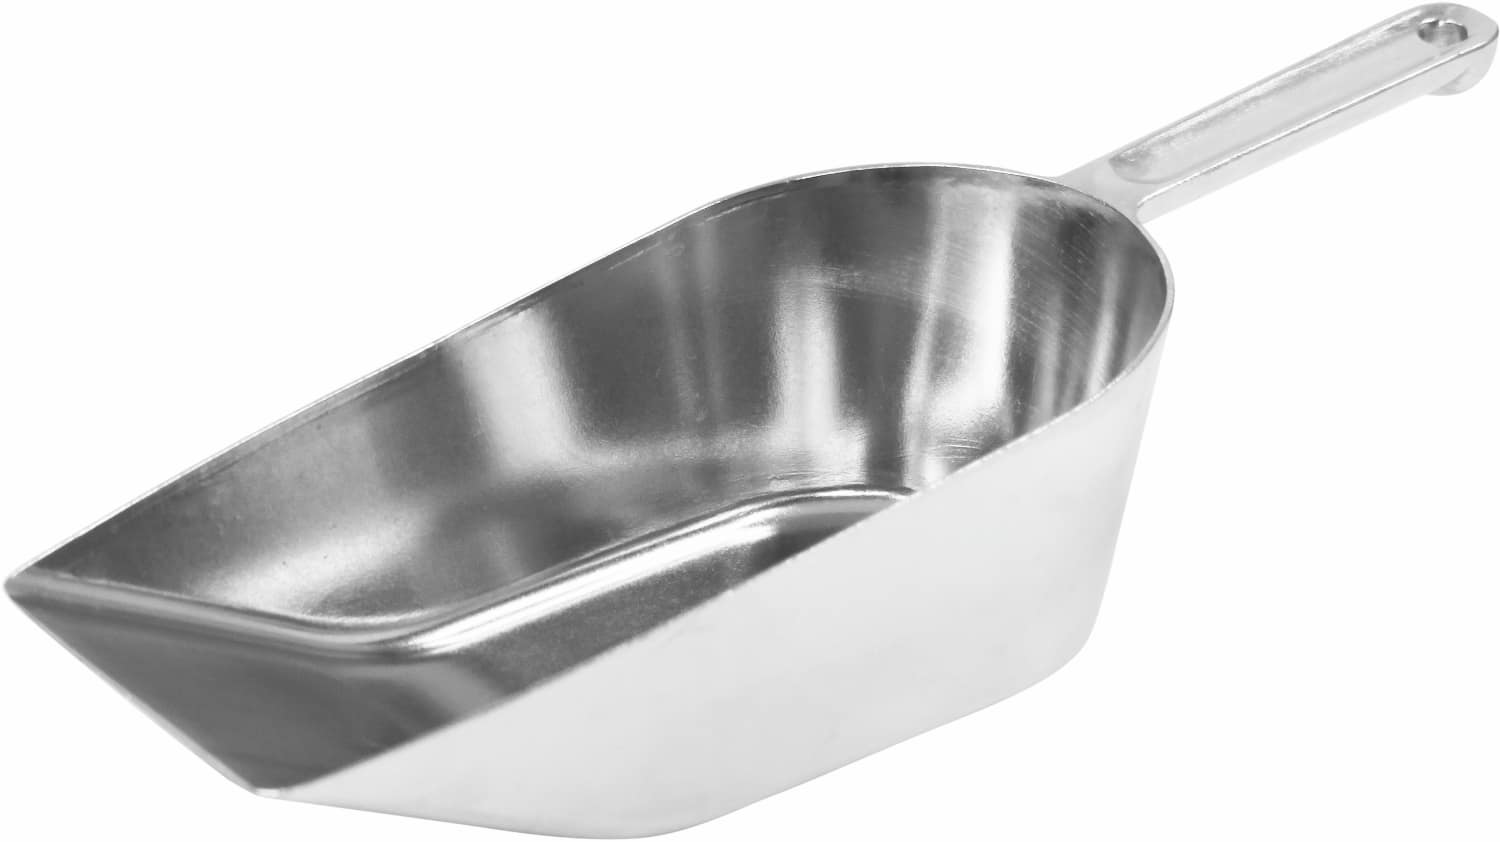 Flour scoops polished surface